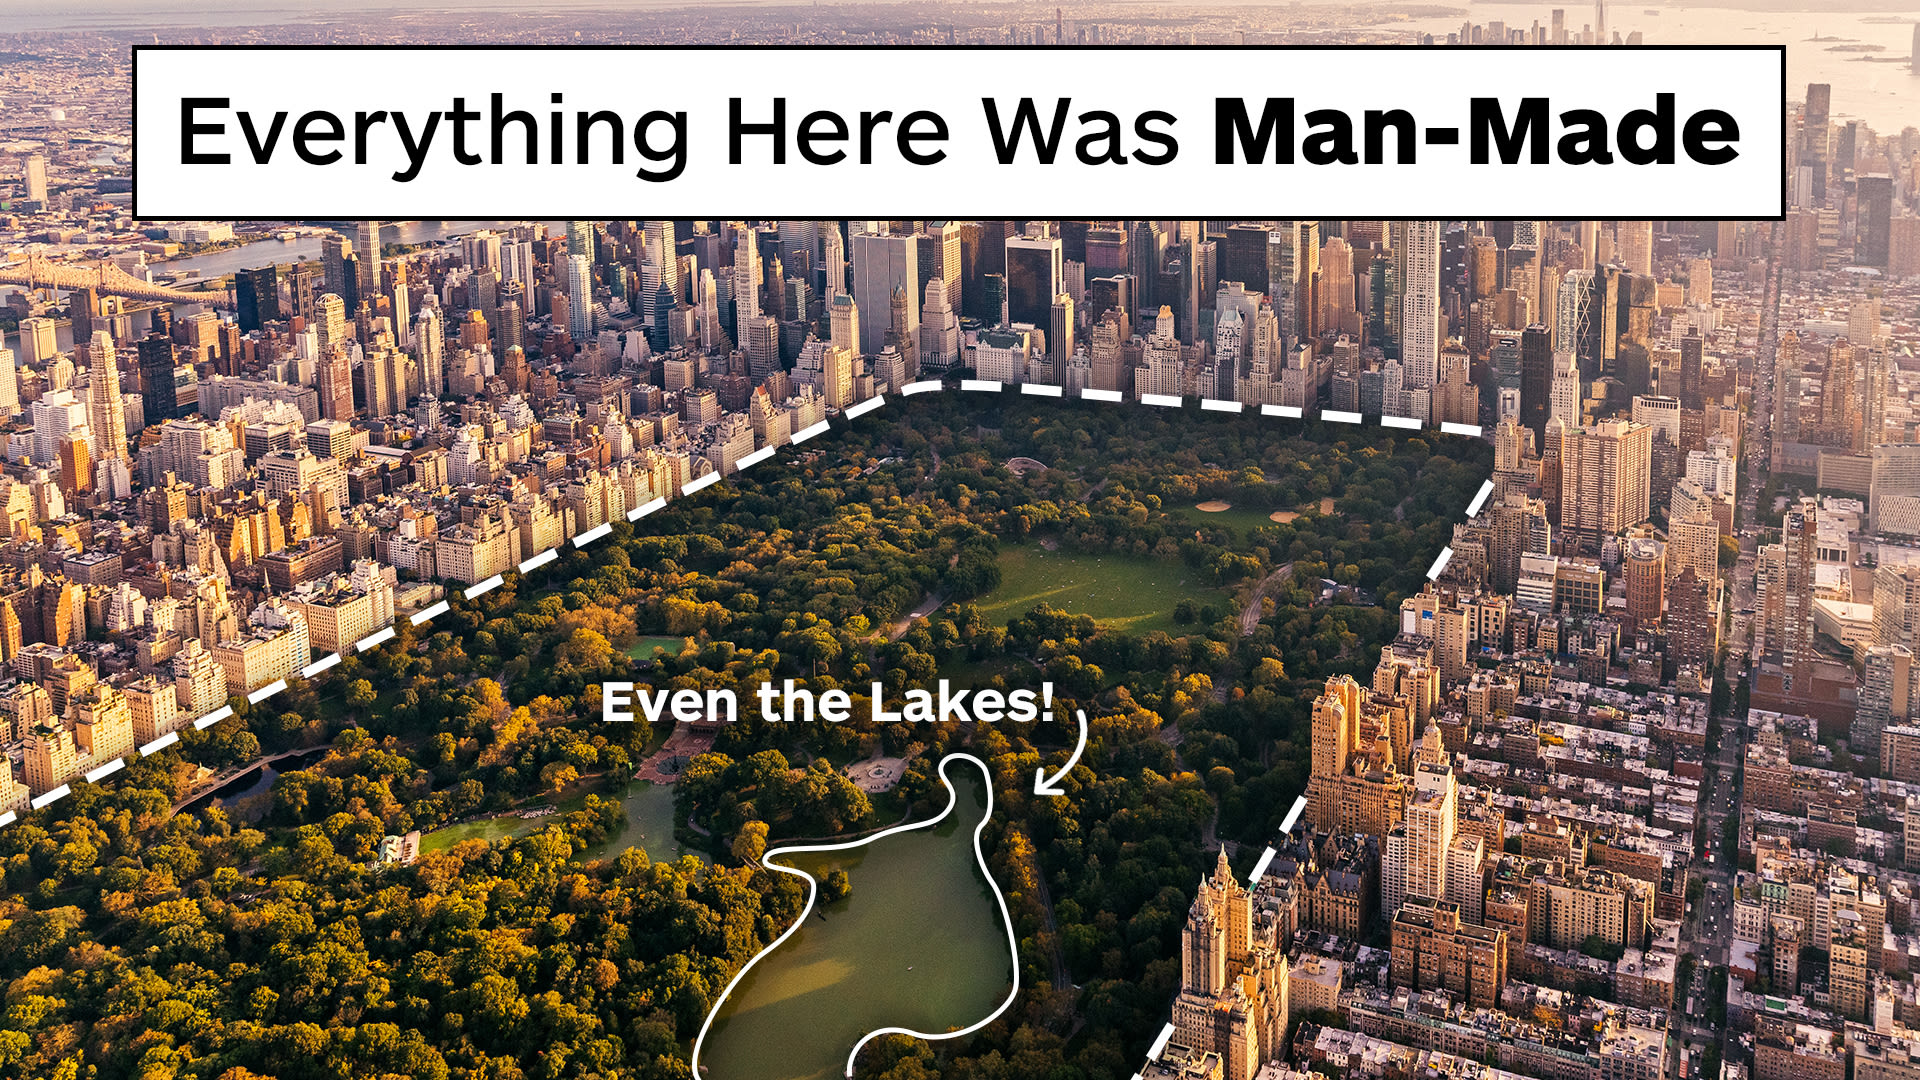 Watch How Central Park Was Created Entirely By Design and Not By